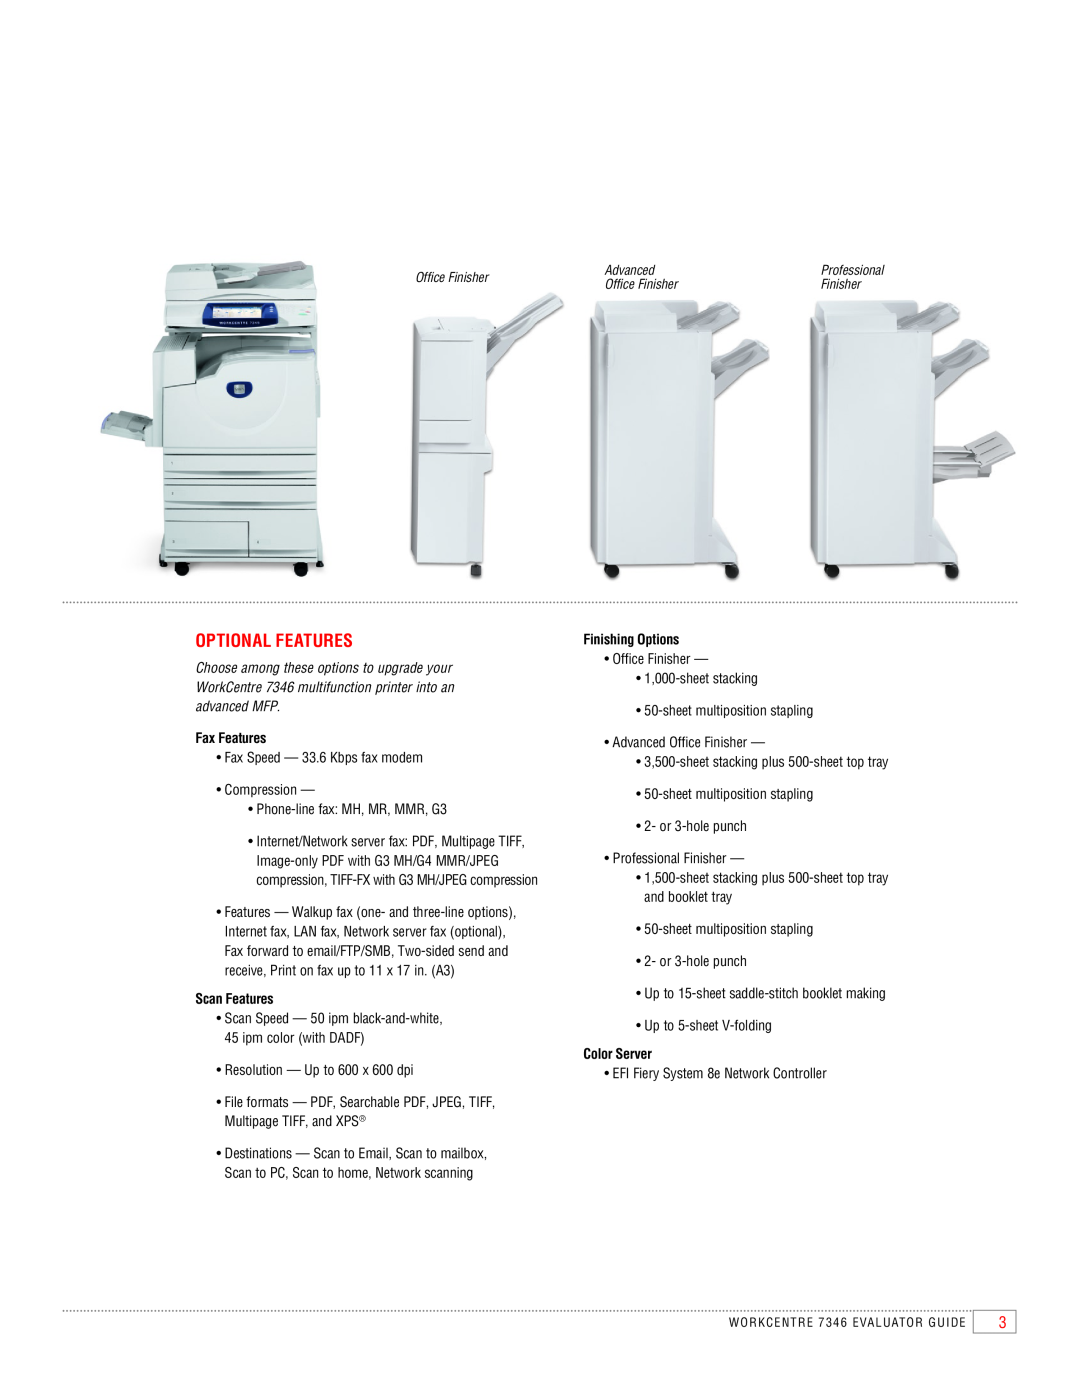 Xerox 7346 manual Optional Features, Fax Features, Scan Features, Finishing Options, Color Server 